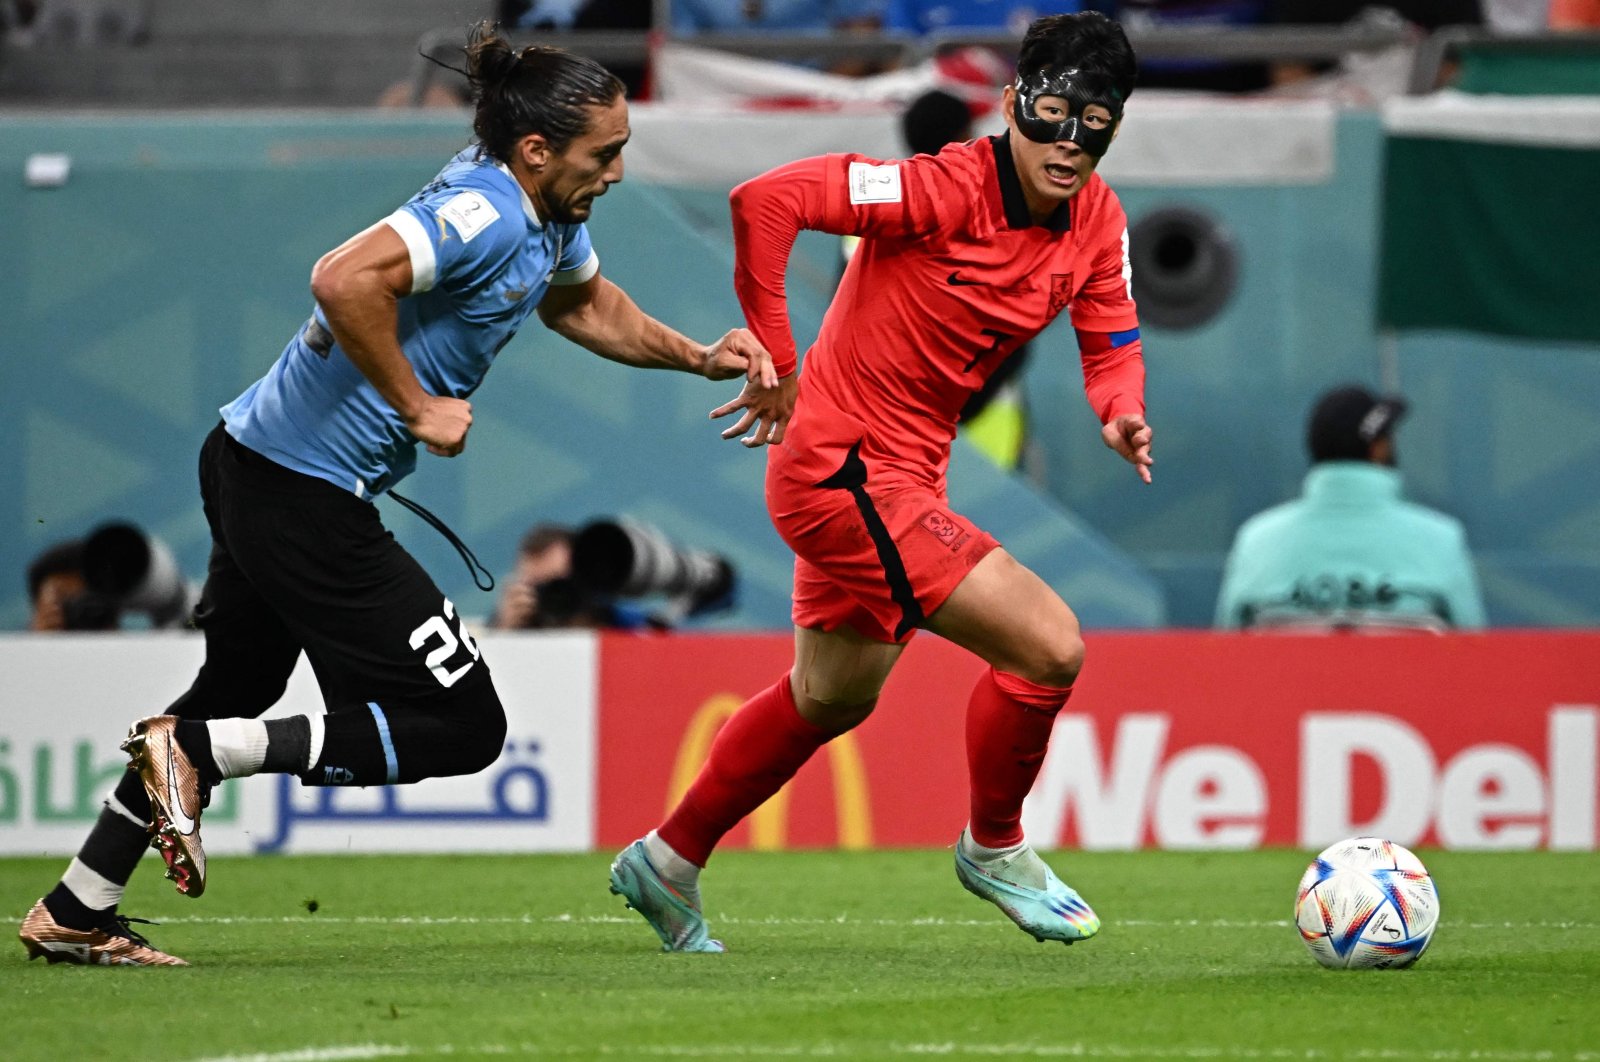 South Korea&#039;s midfielder Son Heung-min runs with the ball past Uruguay&#039;s defender Martin Caceres during the Qatar 2022 World Cup Group H football match between Uruguay and South Korea at the Education City Stadium, Al Rayyan, Doha, Nov. 24, 2022. (AFP Photo)